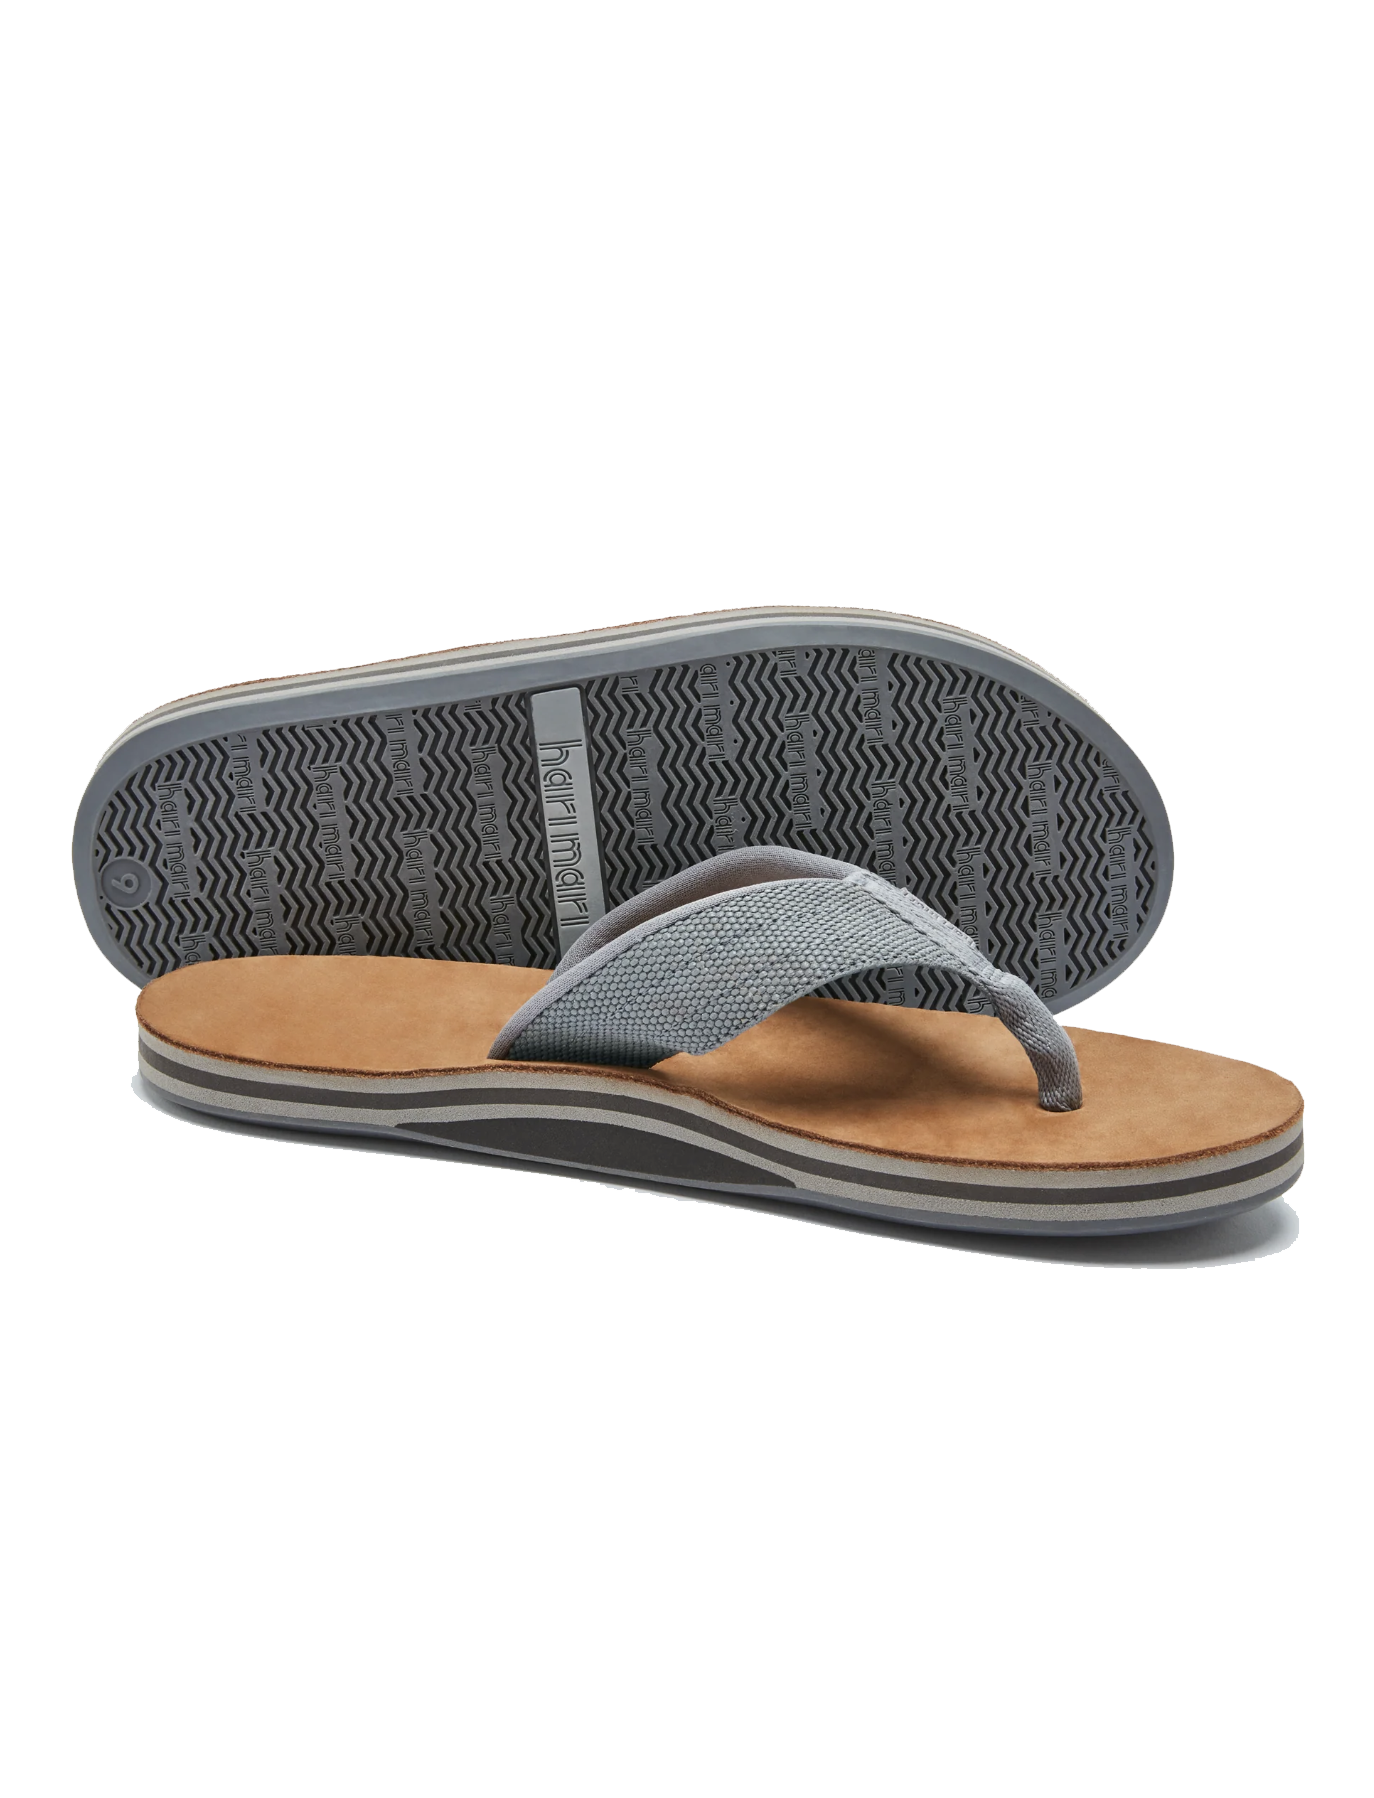 Scouts Sandal Pewter